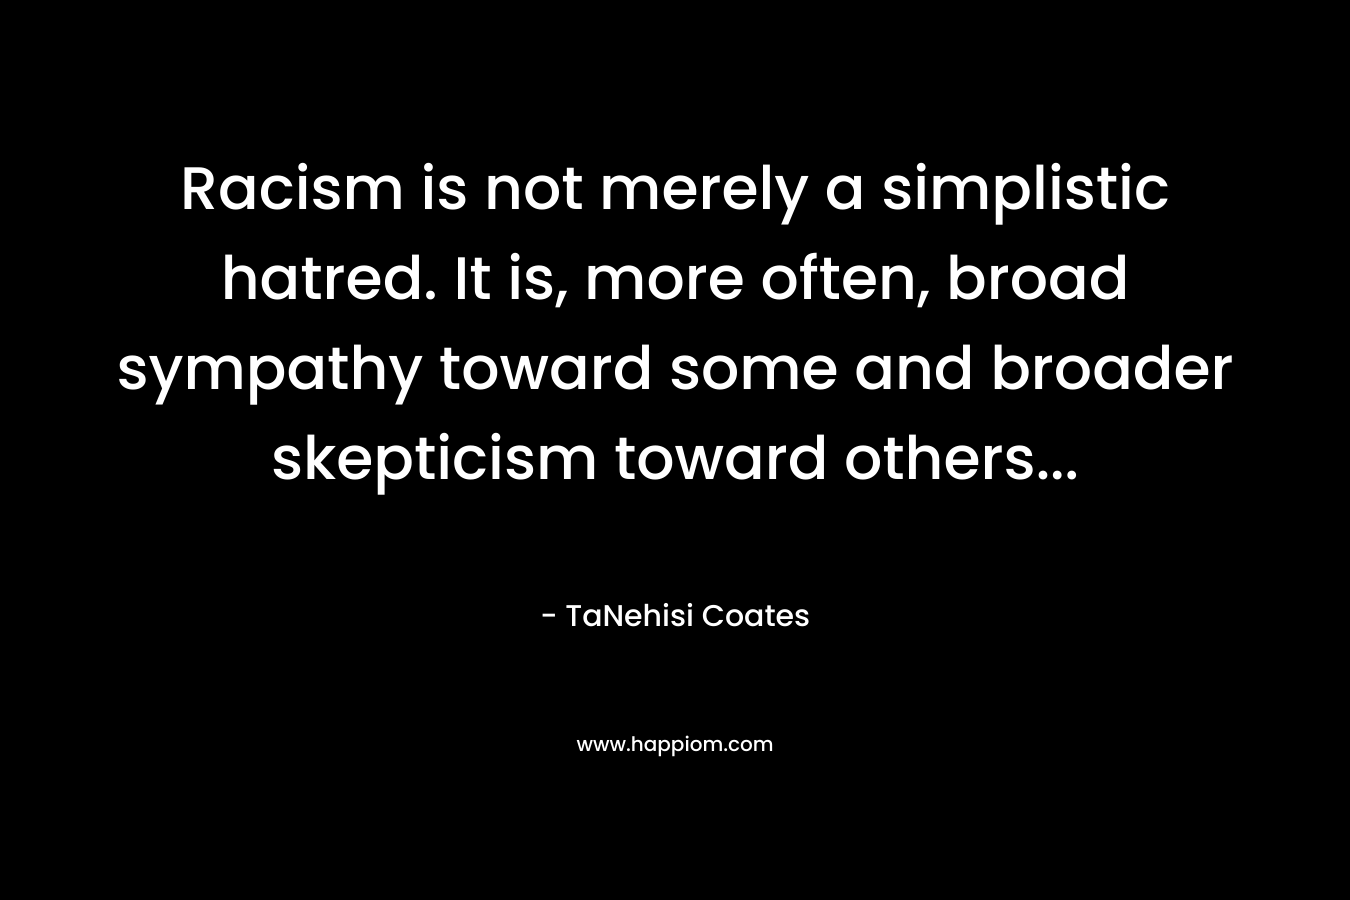 Racism is not merely a simplistic hatred. It is, more often, broad sympathy toward some and broader skepticism toward others… – TaNehisi Coates